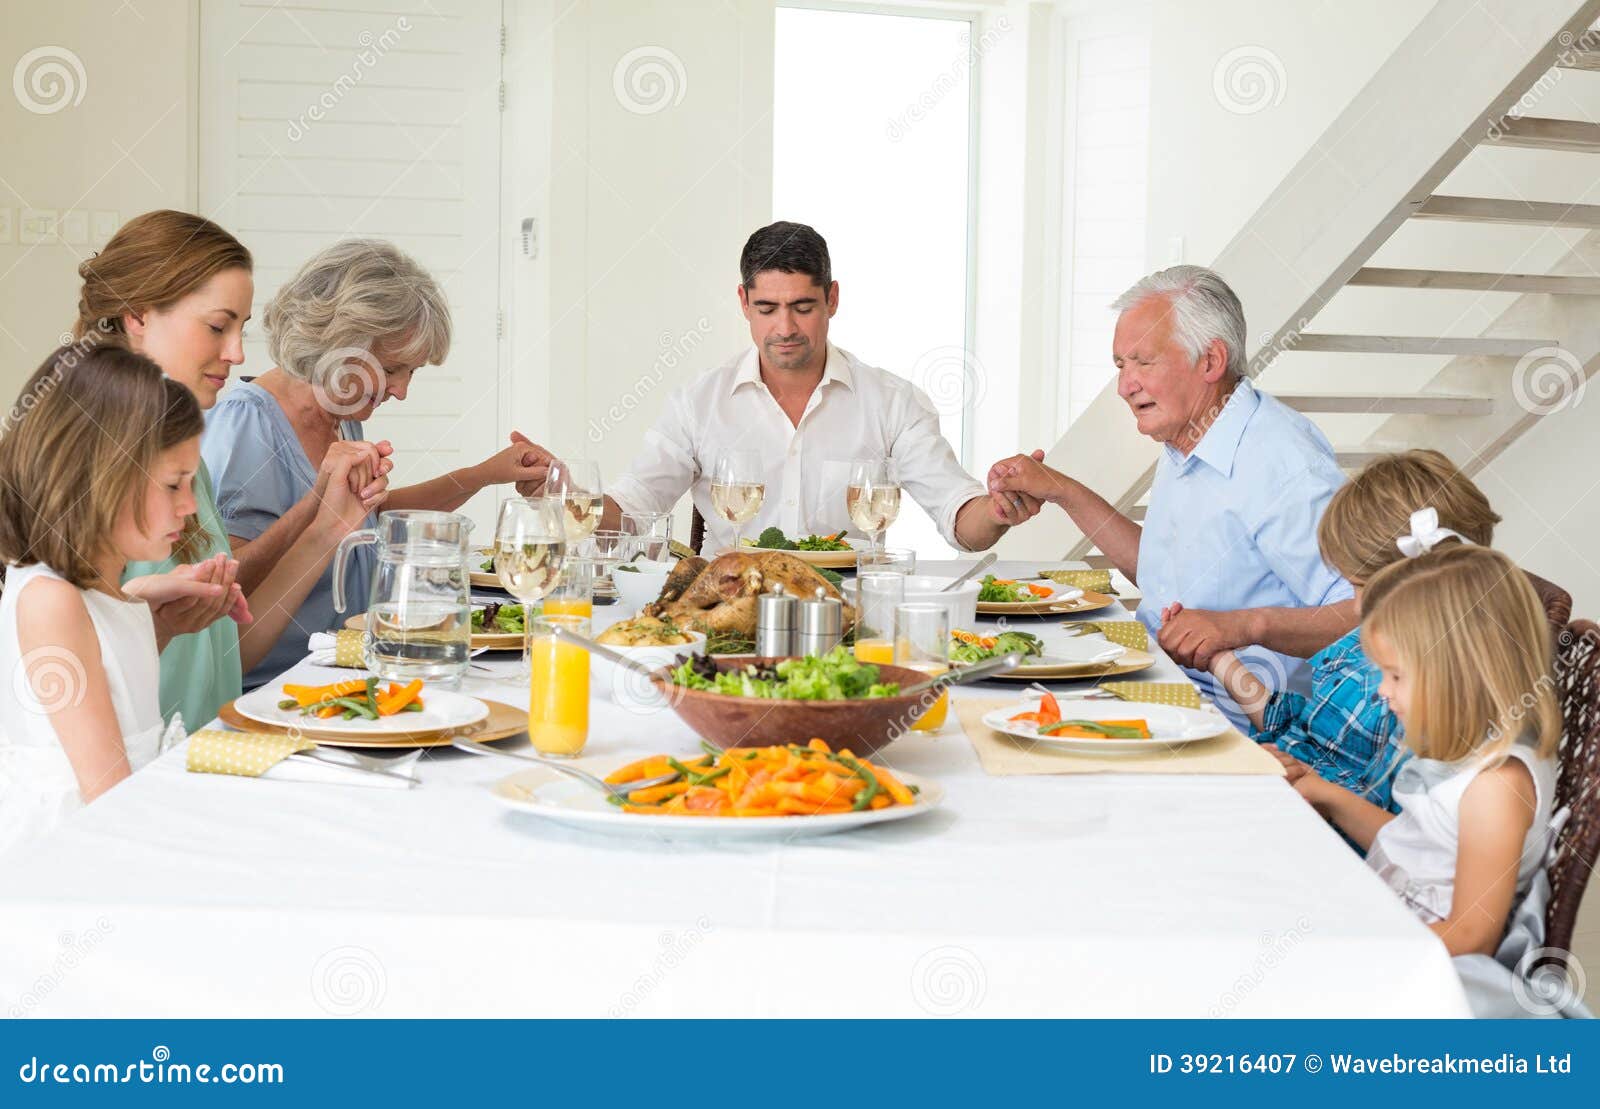  Together Before Meal At Dining Table Stock Photo - Image: 39216407